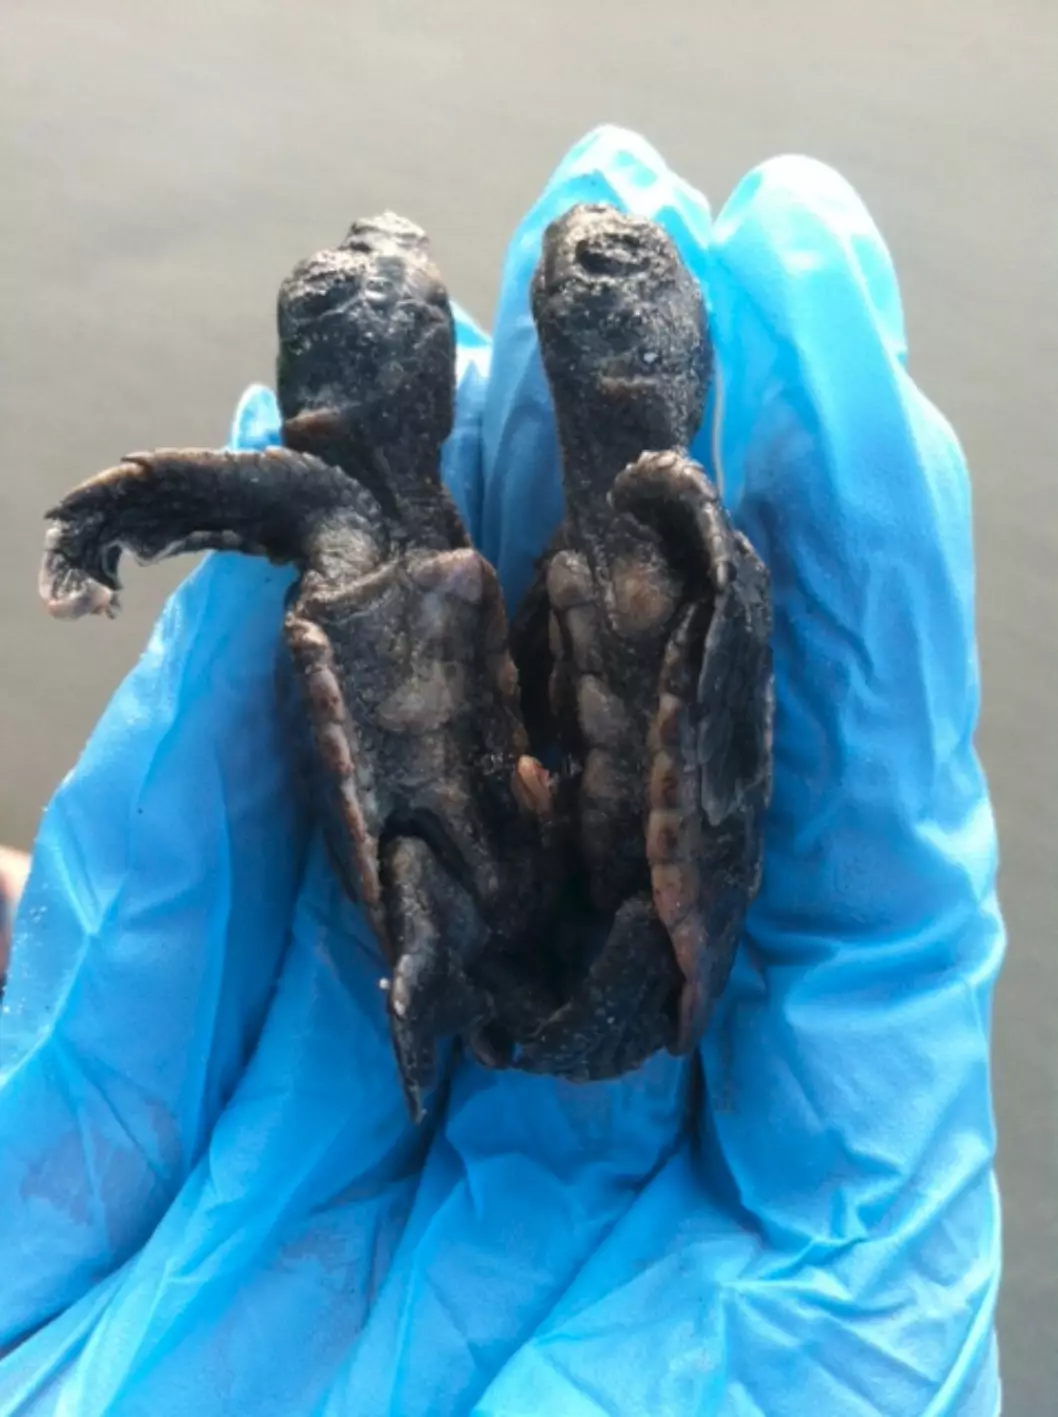 The tiny two-headed turtle was found by volunteers.